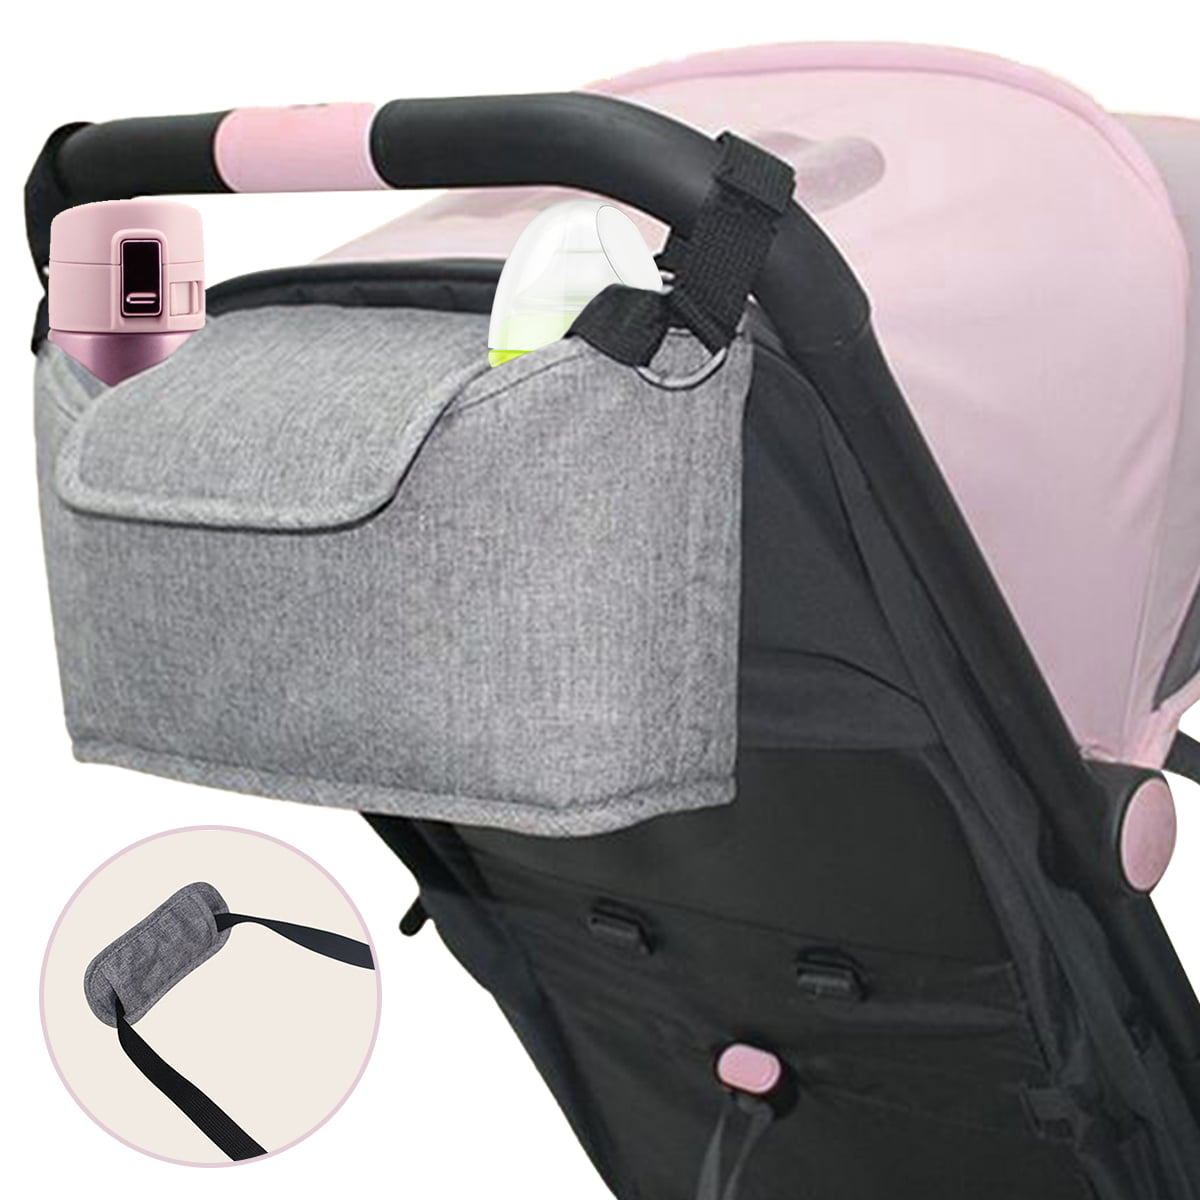 GREY Mountain Buggy Baby Jogger Stroller Cup Holder Organizer Wipes Diaper Phone 